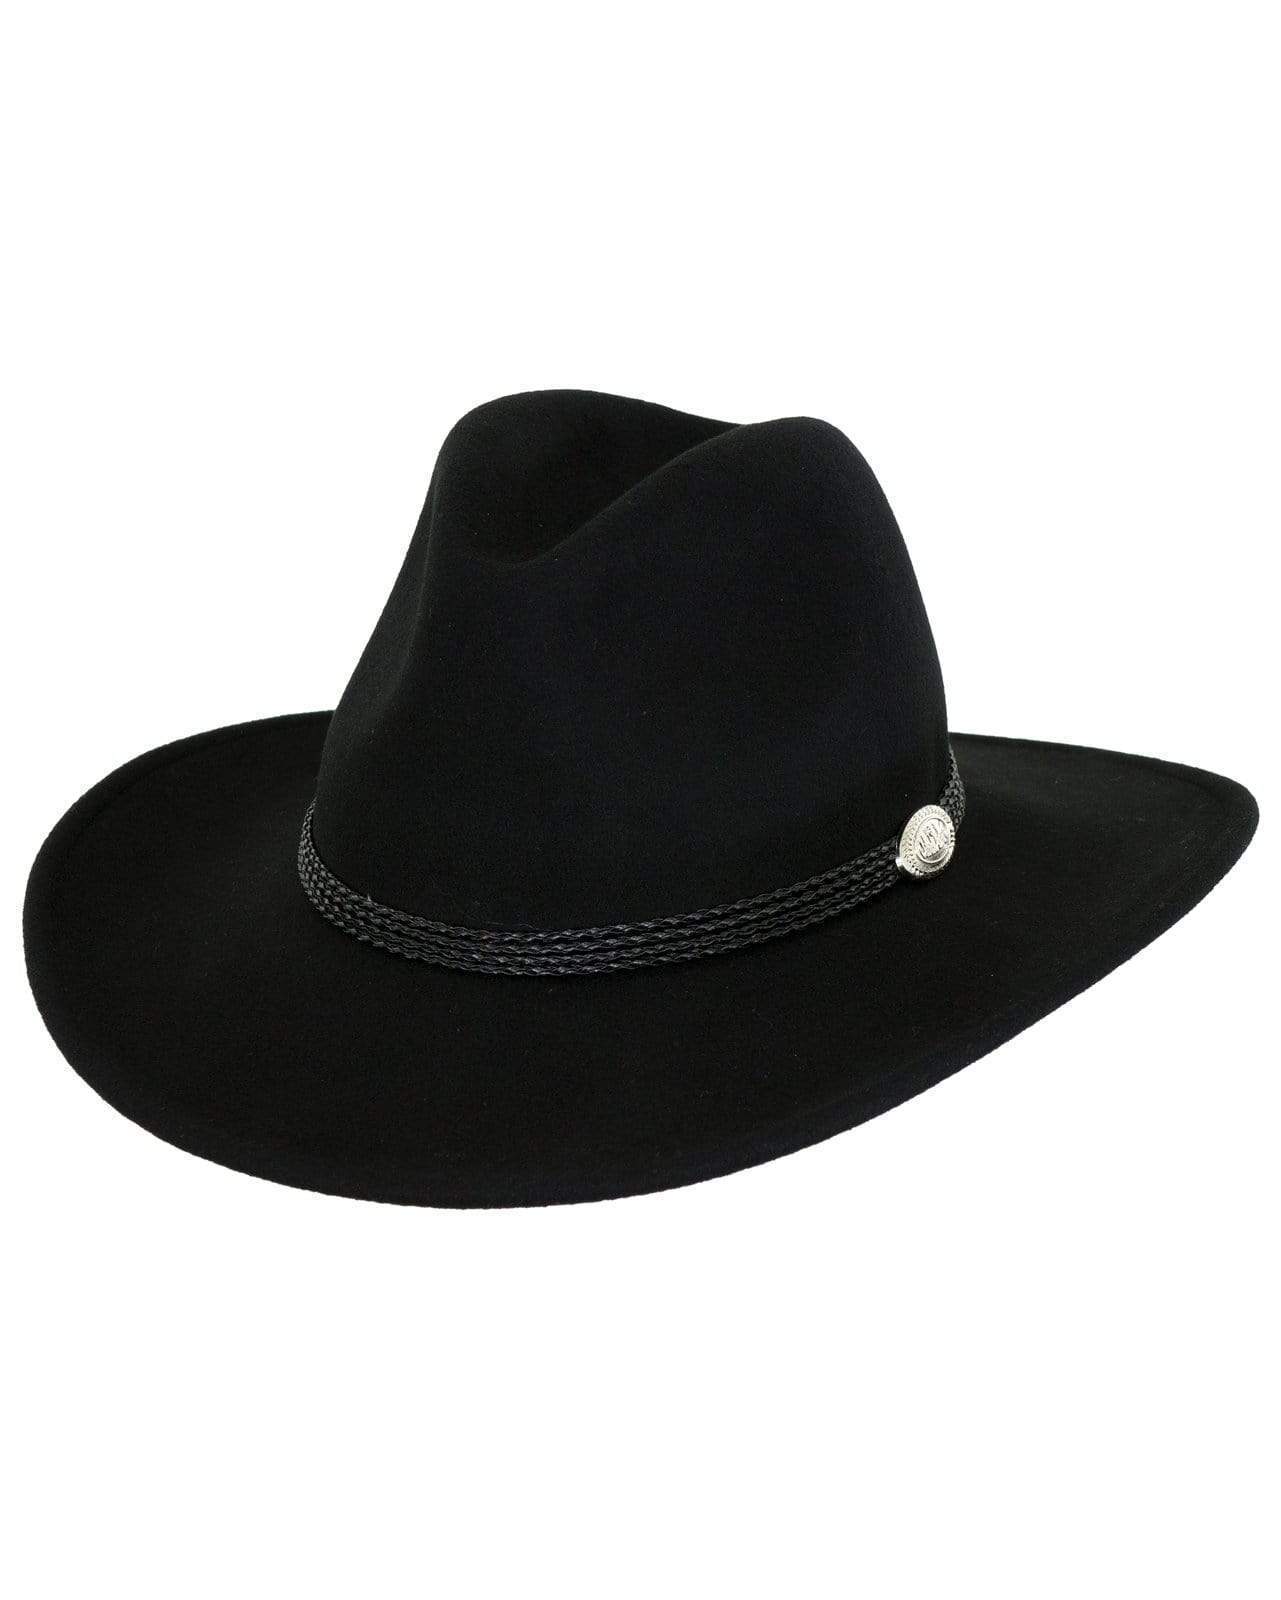 Outback Trading Company Shy Game Black / S 1307-BLK-SM 089043945516 Hats